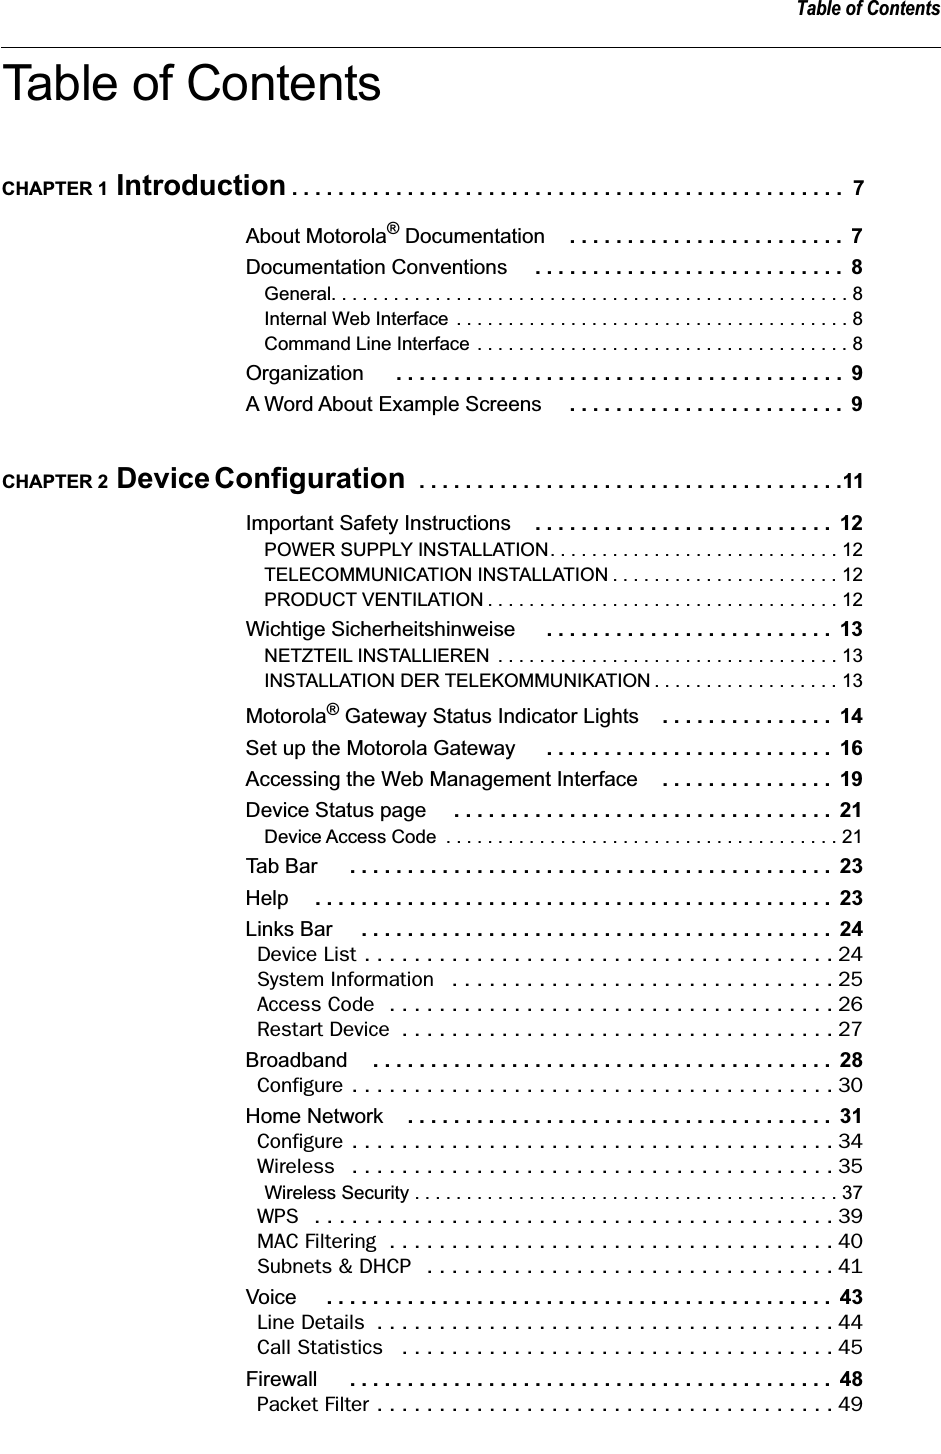  Table of Contents Table of Contents CHAPTER 1  Introduction  . . . . . . . . . . . . . . . . . . . . . . . . . . . . . . . . . . . . . . . . . . . . . . . .  7 About Motorola ®  Documentation . . . . . . . . . . . . . . . . . . . . . . . .  7 Documentation Conventions  . . . . . . . . . . . . . . . . . . . . . . . . . . .  8 General. . . . . . . . . . . . . . . . . . . . . . . . . . . . . . . . . . . . . . . . . . . . . . . . . . 8Internal Web Interface . . . . . . . . . . . . . . . . . . . . . . . . . . . . . . . . . . . . . . 8Command Line Interface . . . . . . . . . . . . . . . . . . . . . . . . . . . . . . . . . . . . 8 Organization  . . . . . . . . . . . . . . . . . . . . . . . . . . . . . . . . . . . . . . .  9 A Word About Example Screens  . . . . . . . . . . . . . . . . . . . . . . . .  9 CHAPTER 2  Device Configuration   . . . . . . . . . . . . . . . . . . . . . . . . . . . . . . . . . . . . .11 Important Safety Instructions . . . . . . . . . . . . . . . . . . . . . . . . . .  12 POWER SUPPLY INSTALLATION. . . . . . . . . . . . . . . . . . . . . . . . . . . . 12TELECOMMUNICATION INSTALLATION . . . . . . . . . . . . . . . . . . . . . . 12PRODUCT VENTILATION . . . . . . . . . . . . . . . . . . . . . . . . . . . . . . . . . . 12 Wichtige Sicherheitshinweise  . . . . . . . . . . . . . . . . . . . . . . . . .  13 NETZTEIL INSTALLIEREN  . . . . . . . . . . . . . . . . . . . . . . . . . . . . . . . . . 13INSTALLATION DER TELEKOMMUNIKATION . . . . . . . . . . . . . . . . . . 13 Motorola ®  Gateway Status Indicator Lights . . . . . . . . . . . . . . .  14 Set up the Motorola Gateway  . . . . . . . . . . . . . . . . . . . . . . . . .  16 Accessing the Web Management Interface . . . . . . . . . . . . . . .  19 Device Status page  . . . . . . . . . . . . . . . . . . . . . . . . . . . . . . . . .  21 Device Access Code  . . . . . . . . . . . . . . . . . . . . . . . . . . . . . . . . . . . . . . 21 Tab Bar  . . . . . . . . . . . . . . . . . . . . . . . . . . . . . . . . . . . . . . . . . .  23 Help . . . . . . . . . . . . . . . . . . . . . . . . . . . . . . . . . . . . . . . . . . . . .  23 Links Bar  . . . . . . . . . . . . . . . . . . . . . . . . . . . . . . . . . . . . . . . . .  24 Device List . . . . . . . . . . . . . . . . . . . . . . . . . . . . . . . . . . . . . . 24System Information   . . . . . . . . . . . . . . . . . . . . . . . . . . . . . . . 25Access Code  . . . . . . . . . . . . . . . . . . . . . . . . . . . . . . . . . . . . 26Restart Device  . . . . . . . . . . . . . . . . . . . . . . . . . . . . . . . . . . . 27 Broadband . . . . . . . . . . . . . . . . . . . . . . . . . . . . . . . . . . . . . . . .  28 Configure . . . . . . . . . . . . . . . . . . . . . . . . . . . . . . . . . . . . . . . 30 Home Network . . . . . . . . . . . . . . . . . . . . . . . . . . . . . . . . . . . . .  31 Configure . . . . . . . . . . . . . . . . . . . . . . . . . . . . . . . . . . . . . . . 34Wireless   . . . . . . . . . . . . . . . . . . . . . . . . . . . . . . . . . . . . . . . 35 Wireless Security . . . . . . . . . . . . . . . . . . . . . . . . . . . . . . . . . . . . . . . . . 37 WPS   . . . . . . . . . . . . . . . . . . . . . . . . . . . . . . . . . . . . . . . . . . 39MAC Filtering  . . . . . . . . . . . . . . . . . . . . . . . . . . . . . . . . . . . . 40Subnets &amp; DHCP   . . . . . . . . . . . . . . . . . . . . . . . . . . . . . . . . . 41 Voice  . . . . . . . . . . . . . . . . . . . . . . . . . . . . . . . . . . . . . . . . . . . .  43 Line Details  . . . . . . . . . . . . . . . . . . . . . . . . . . . . . . . . . . . . . 44Call Statistics   . . . . . . . . . . . . . . . . . . . . . . . . . . . . . . . . . . . 45 Firewall  . . . . . . . . . . . . . . . . . . . . . . . . . . . . . . . . . . . . . . . . . .  48 Packet Filter . . . . . . . . . . . . . . . . . . . . . . . . . . . . . . . . . . . . . 49